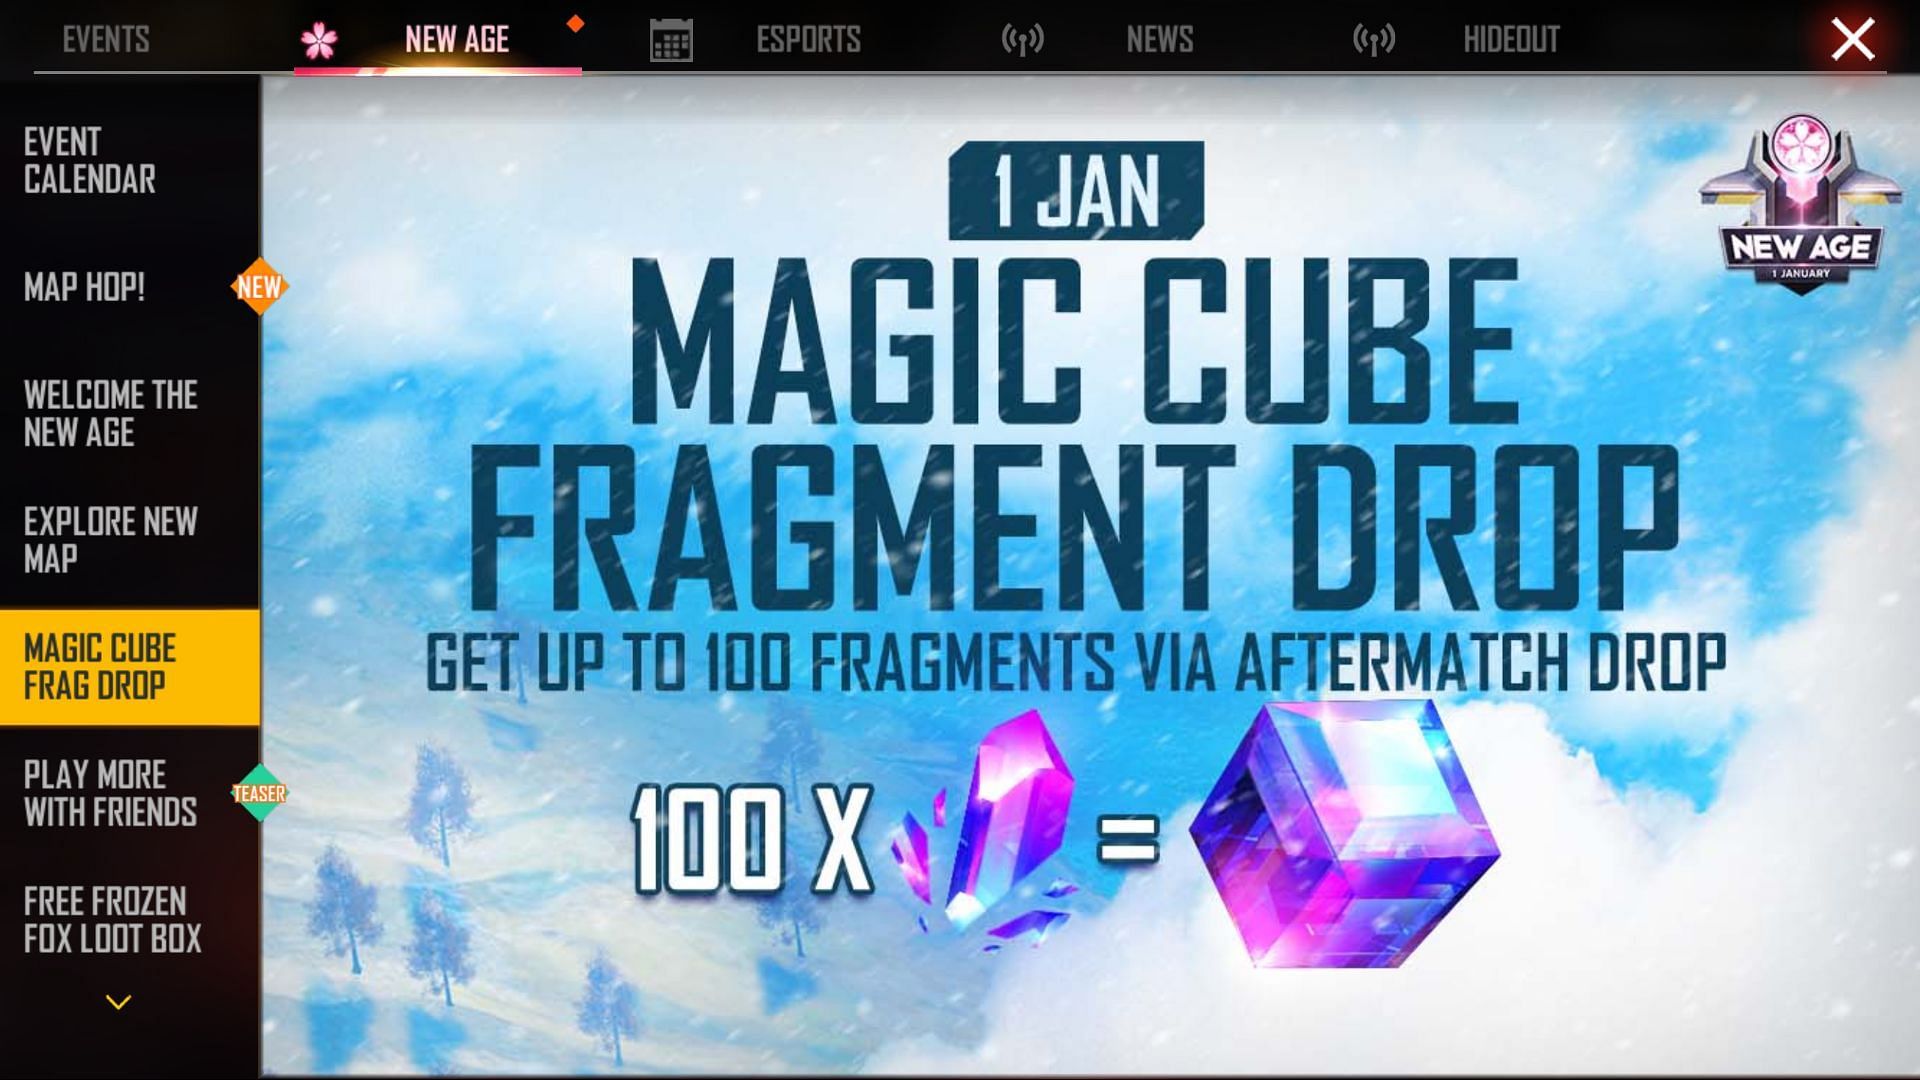 The event is available only for a single day (Image via Free Fire)